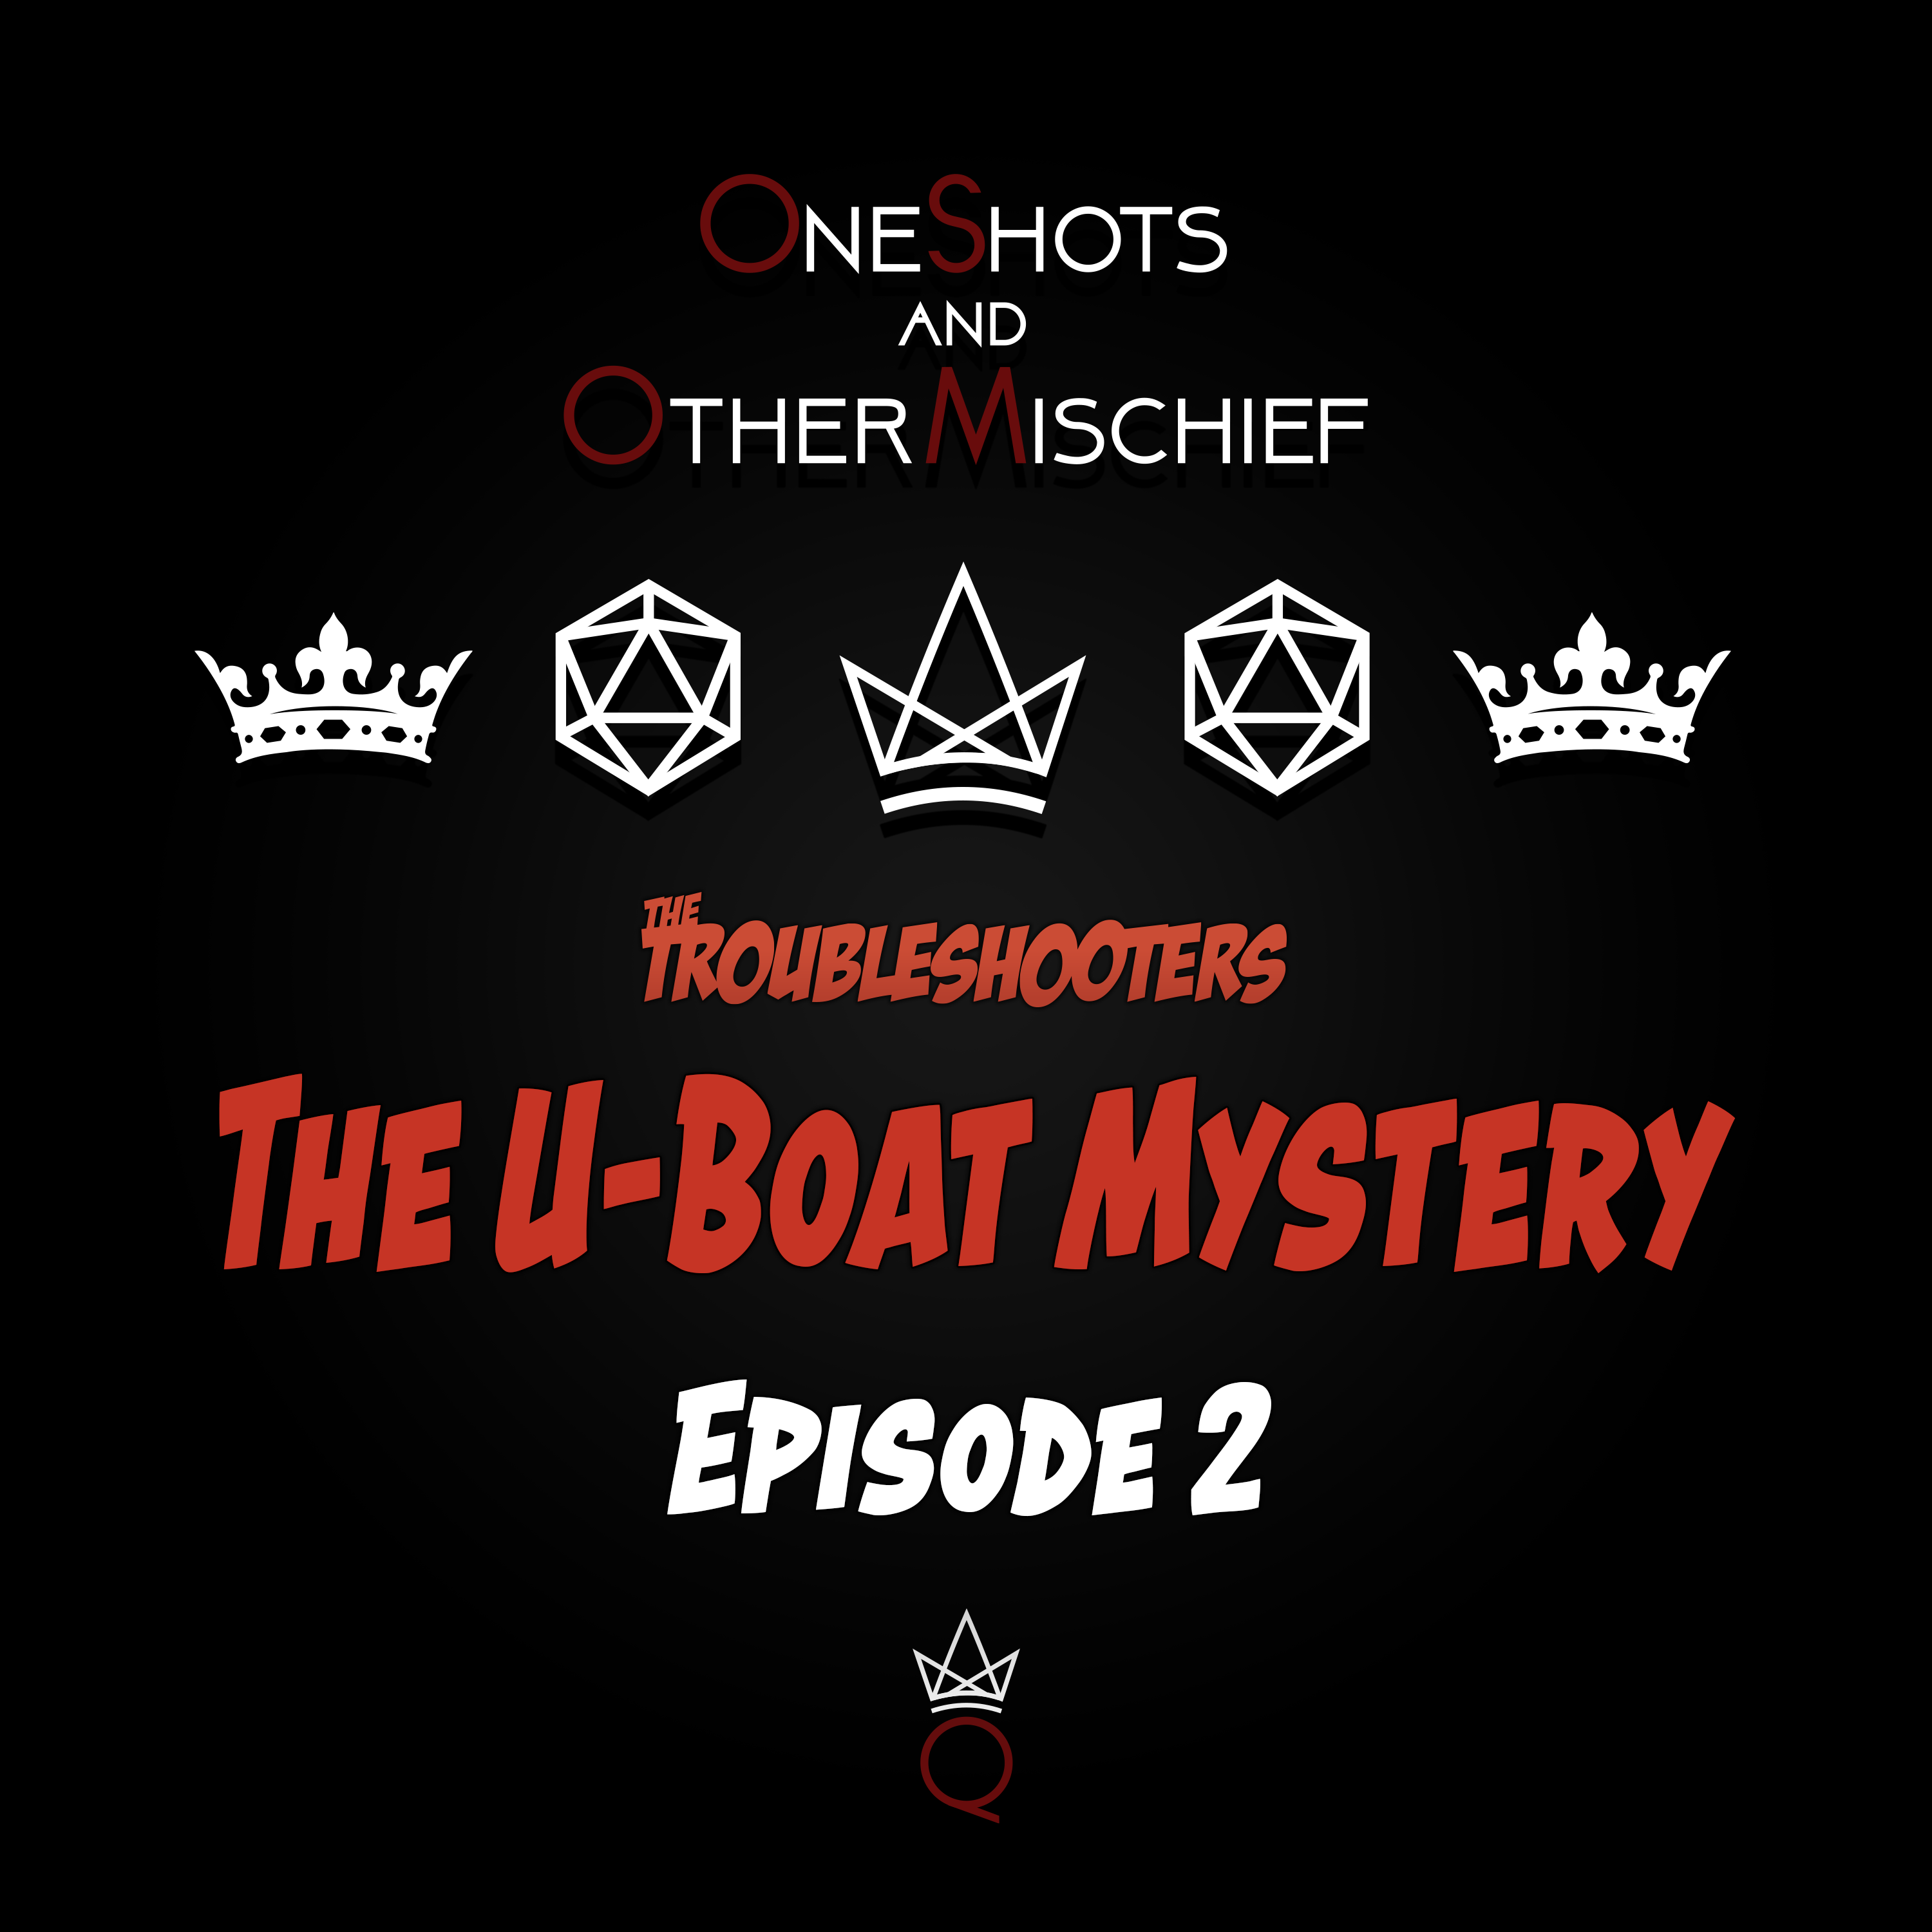 The Troubleshooters - The U-Boat Mystery, Episode 2